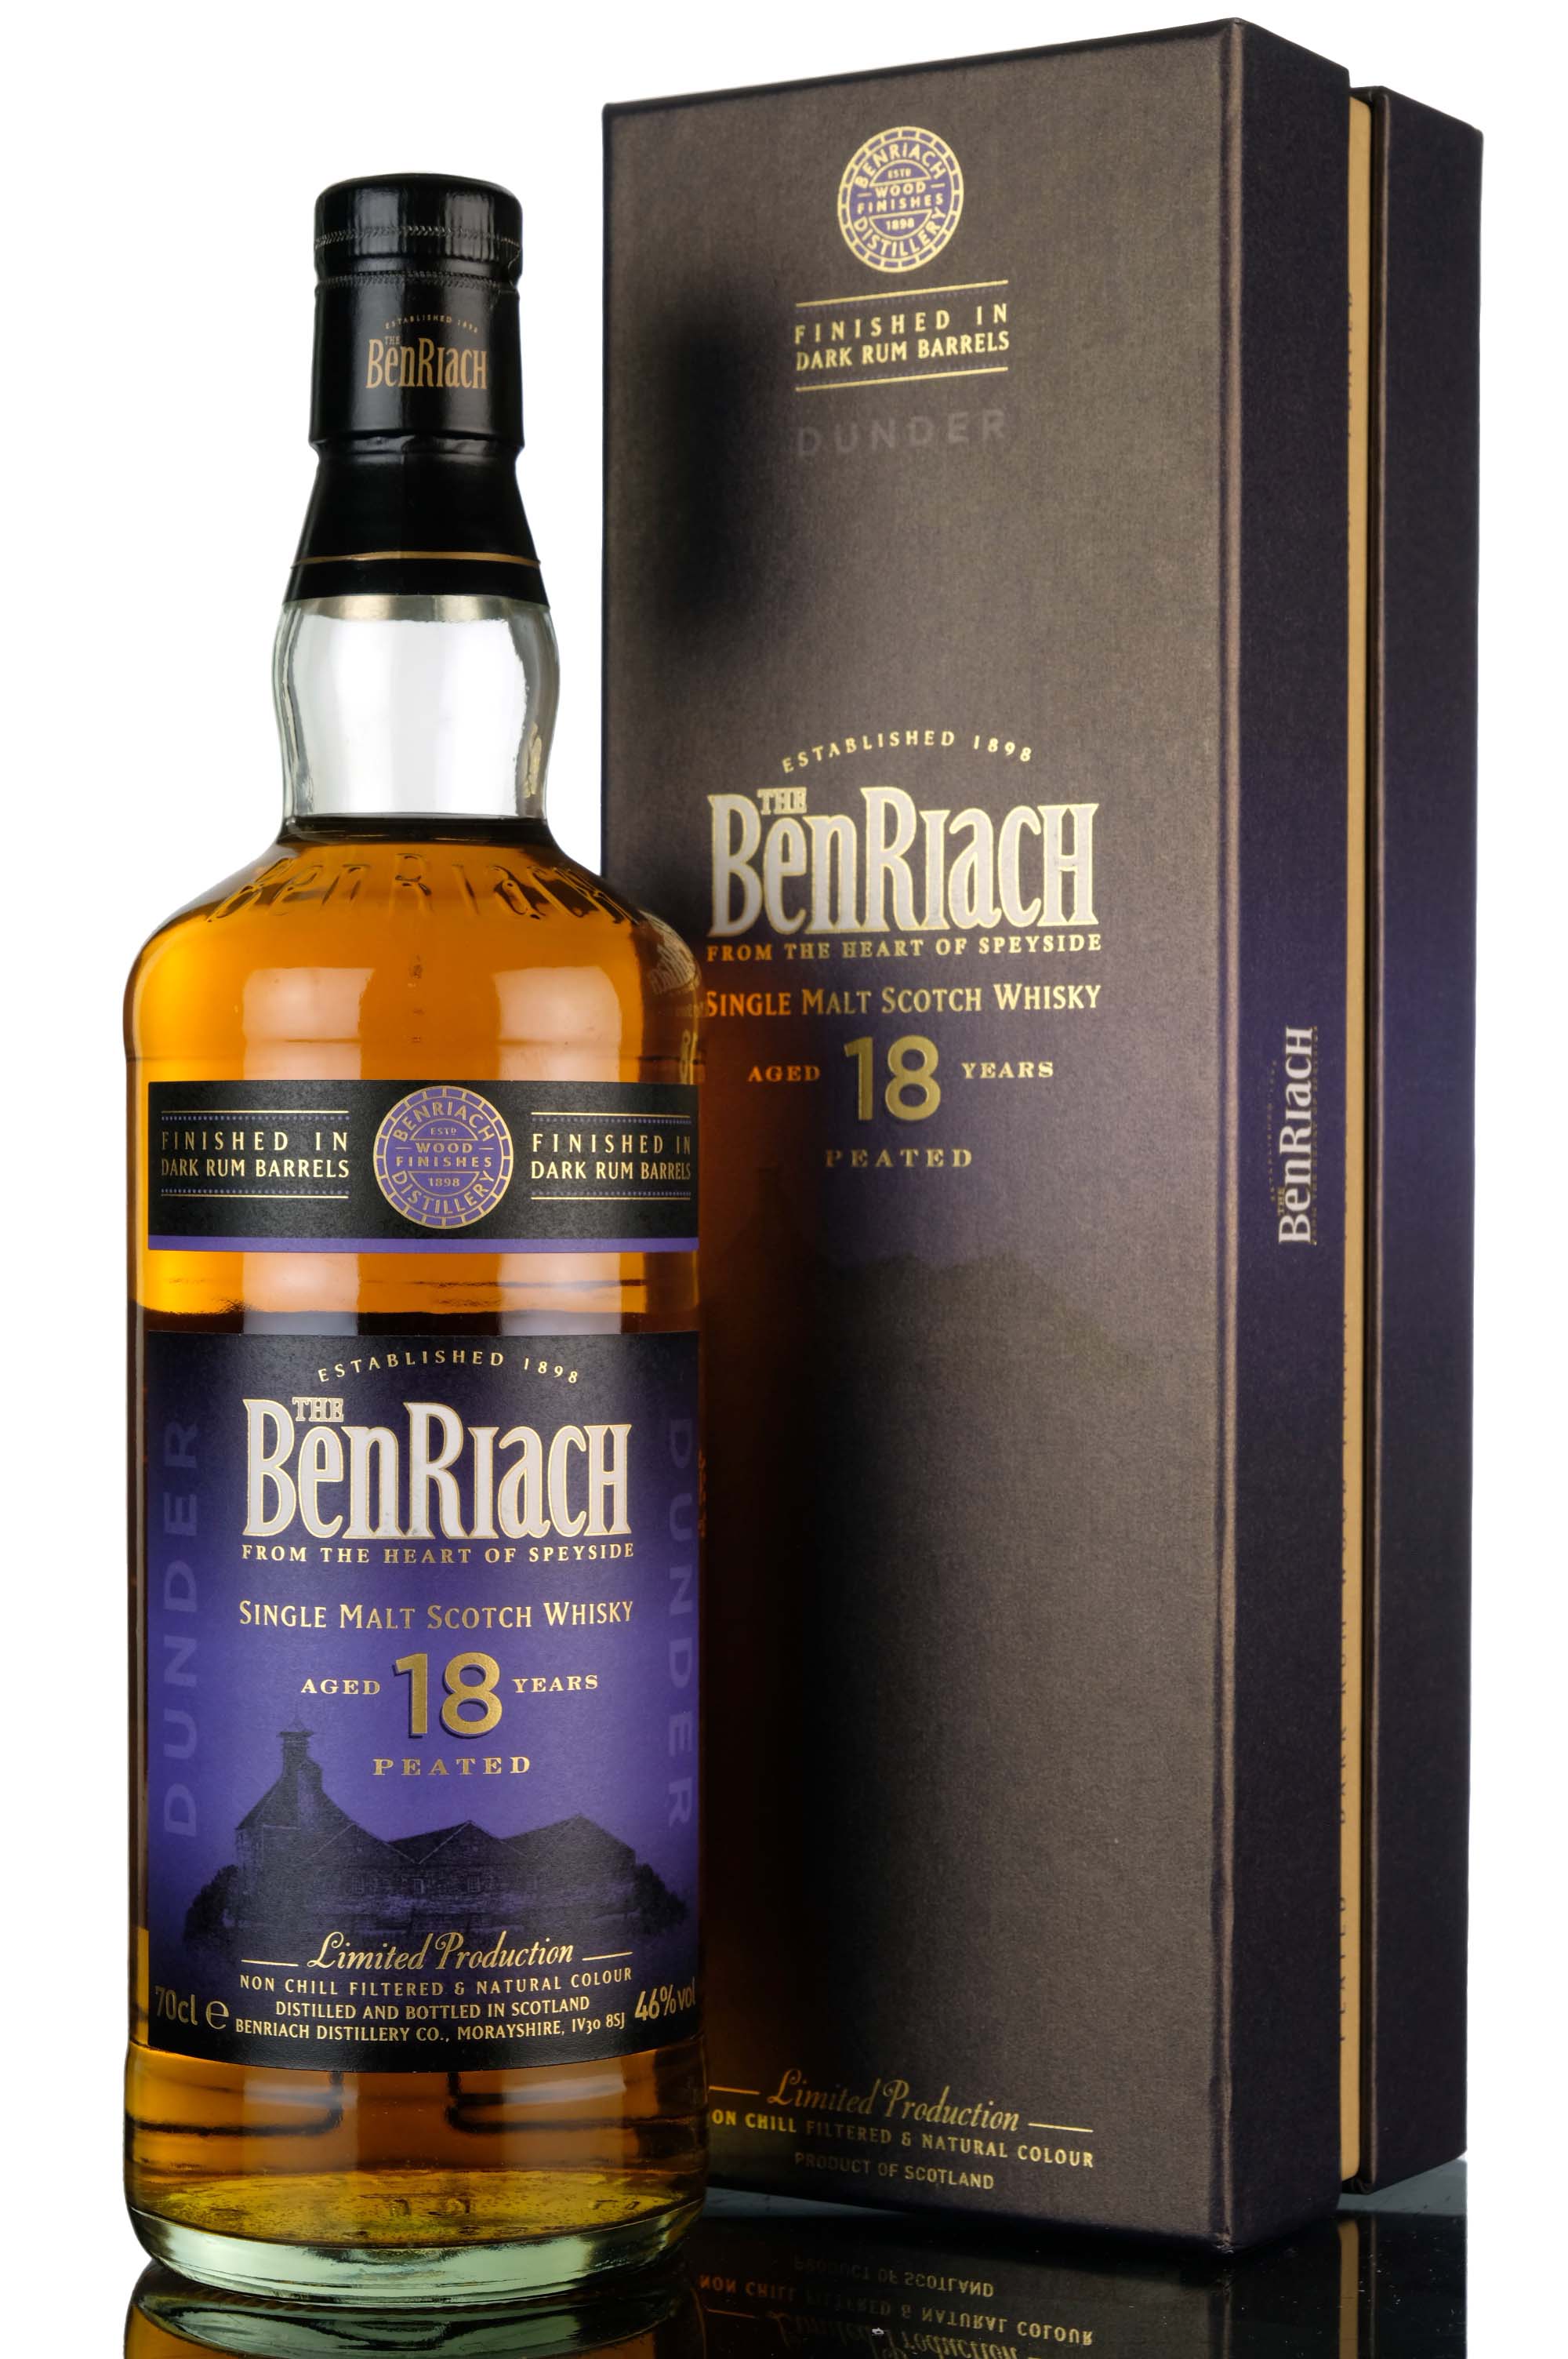 Benriach 18 Year Old - Dunder - 2015 Release